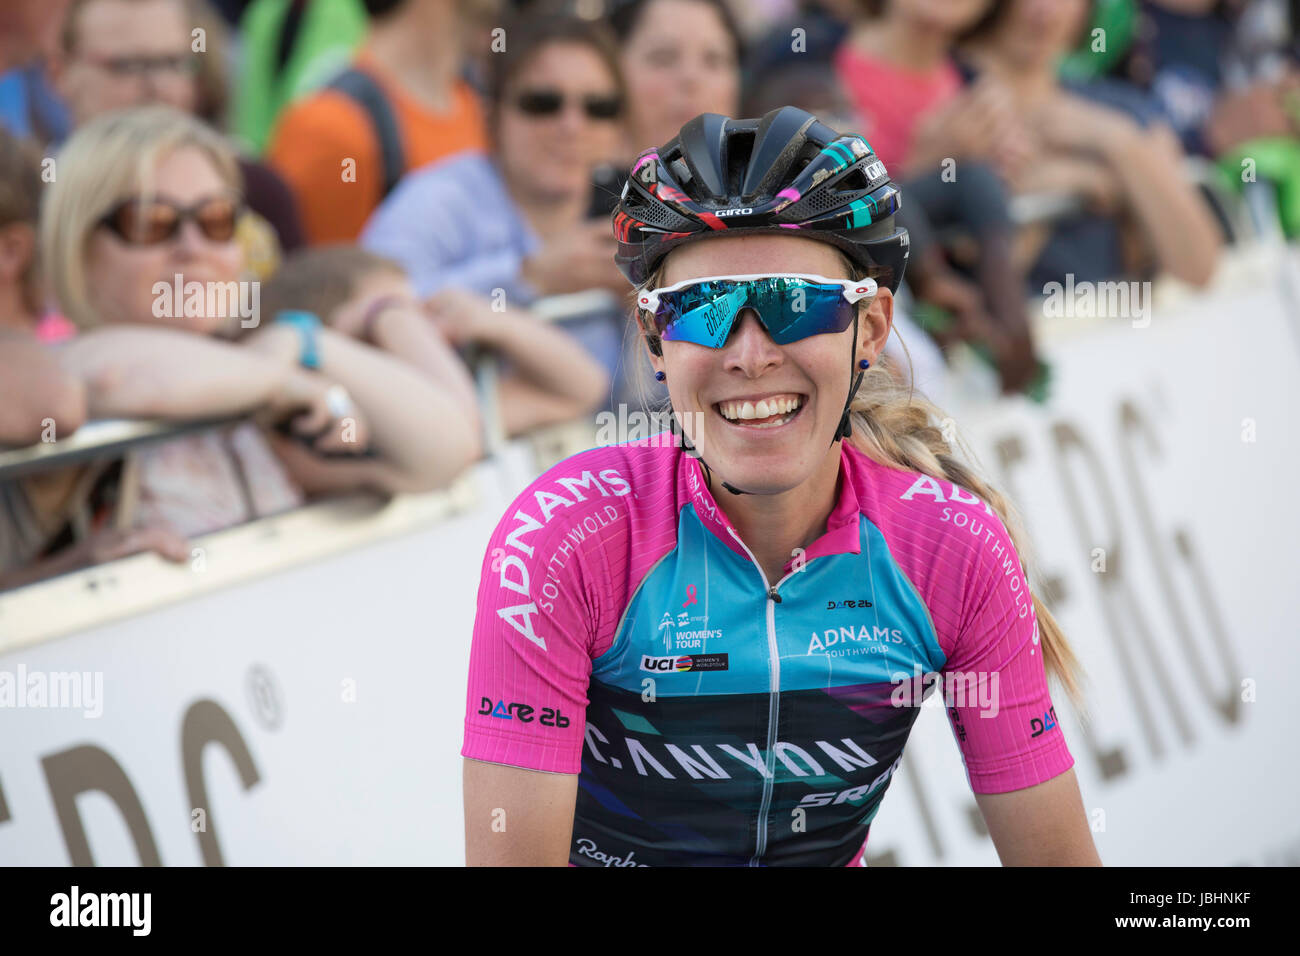 London, UK.  11th June 2017. Final stage of the 2017 Women’s Tour of Britain, Hannah Barnes celebrates her 3rd place overall. Credit: Neville Styles/Alamy Live News Stock Photo